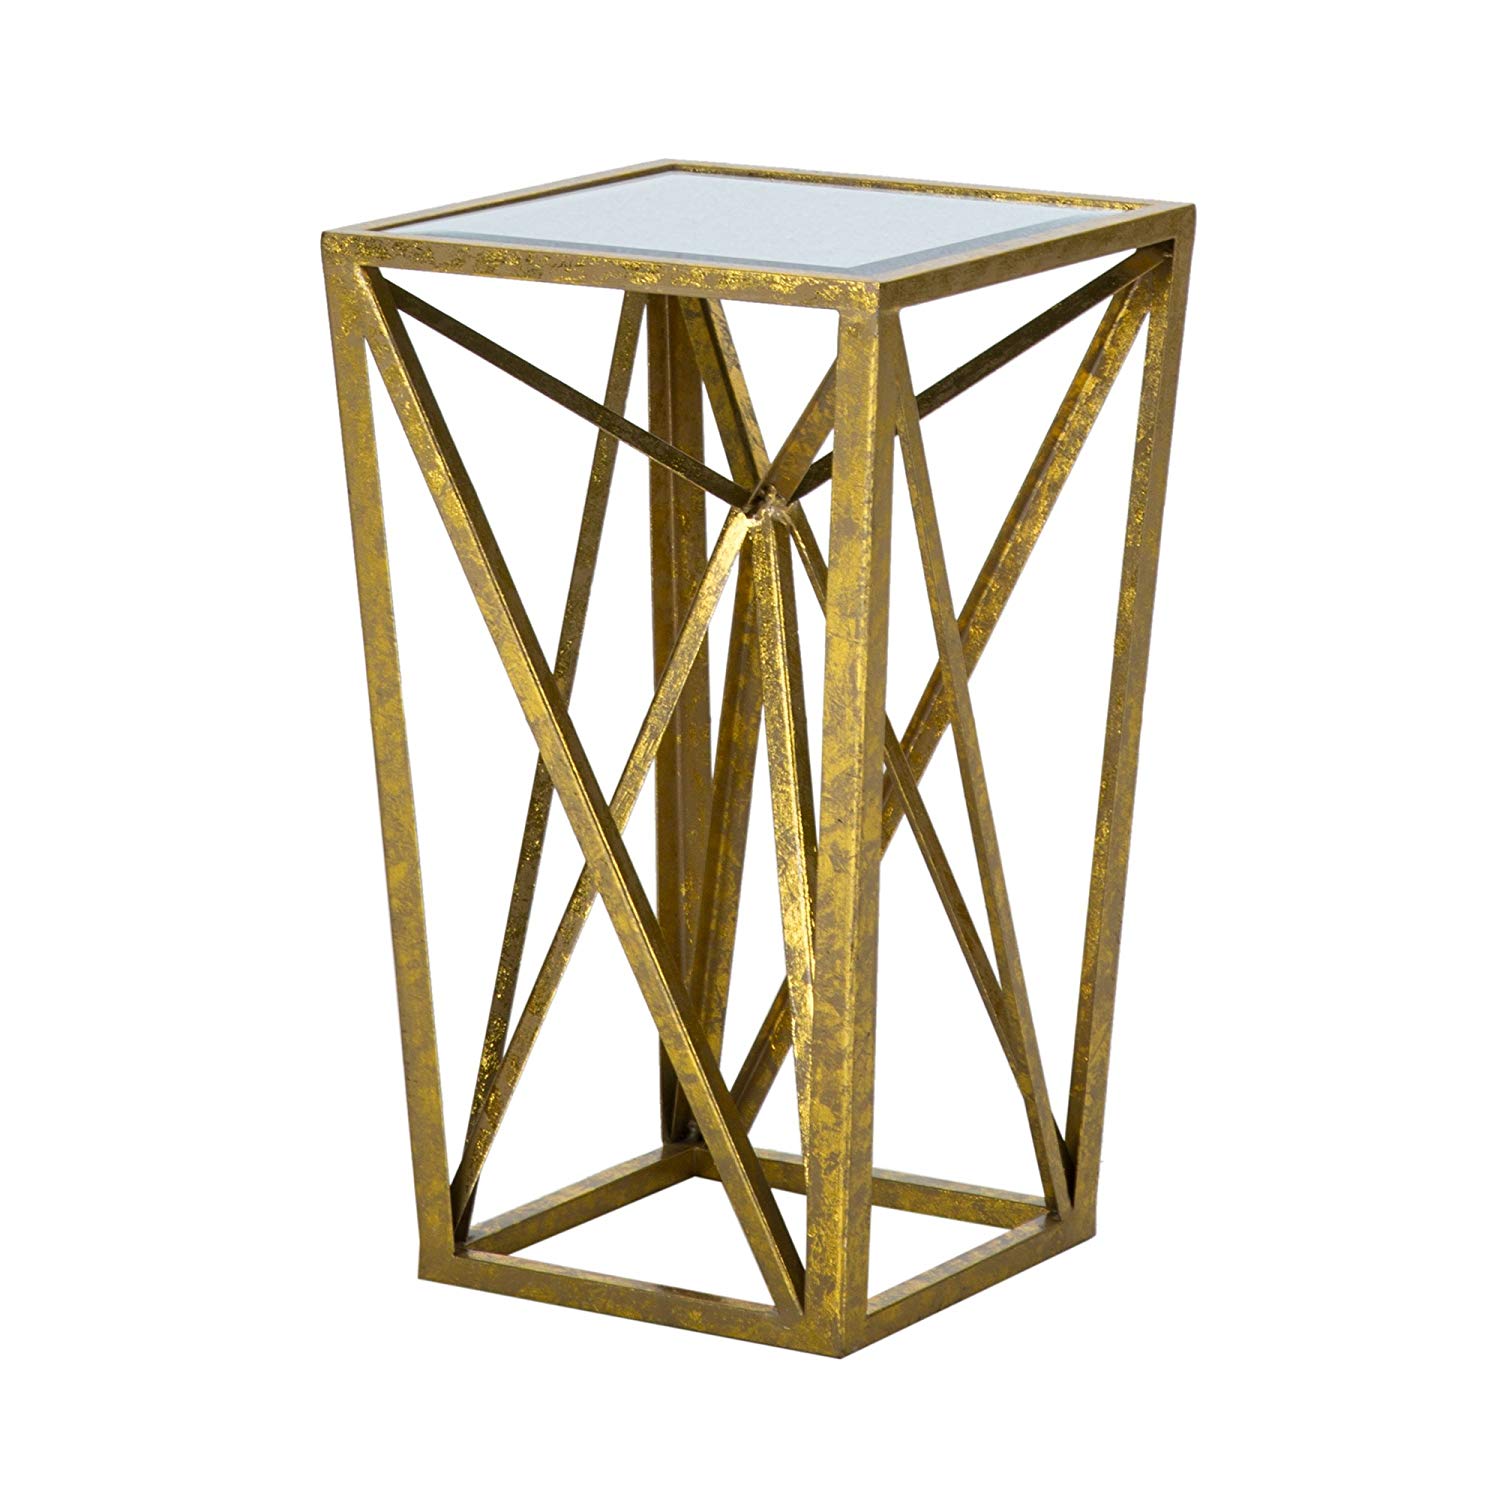 madison park zee accent tables mirror glass metal gold table with drawer side angular design modern style end piece top hollow round skirting hairpin legs bath and beyond bar